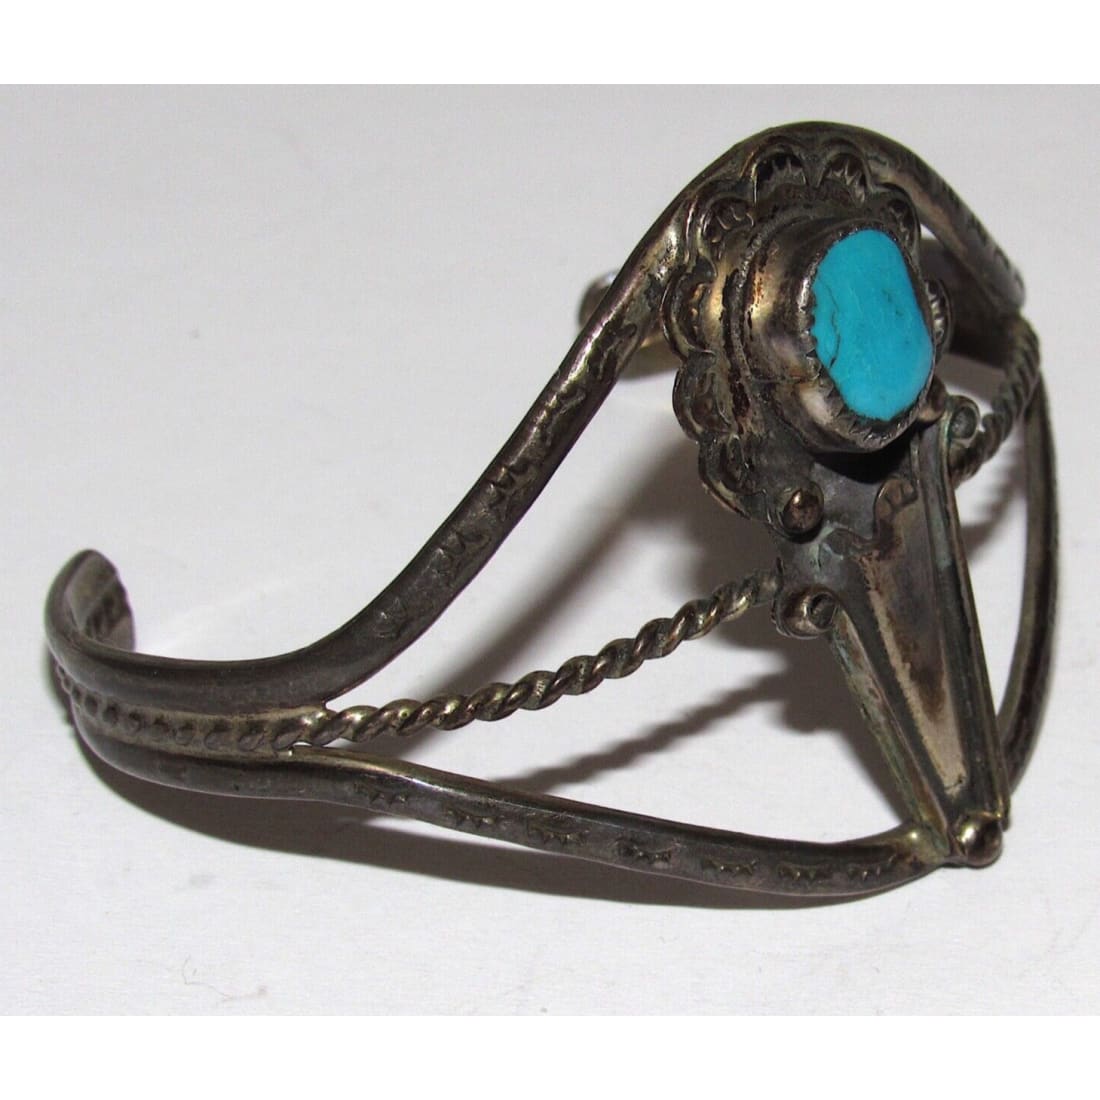 Old Pawn Navajo Cuff Bracelet Sterling Silver Turquoise Cuff